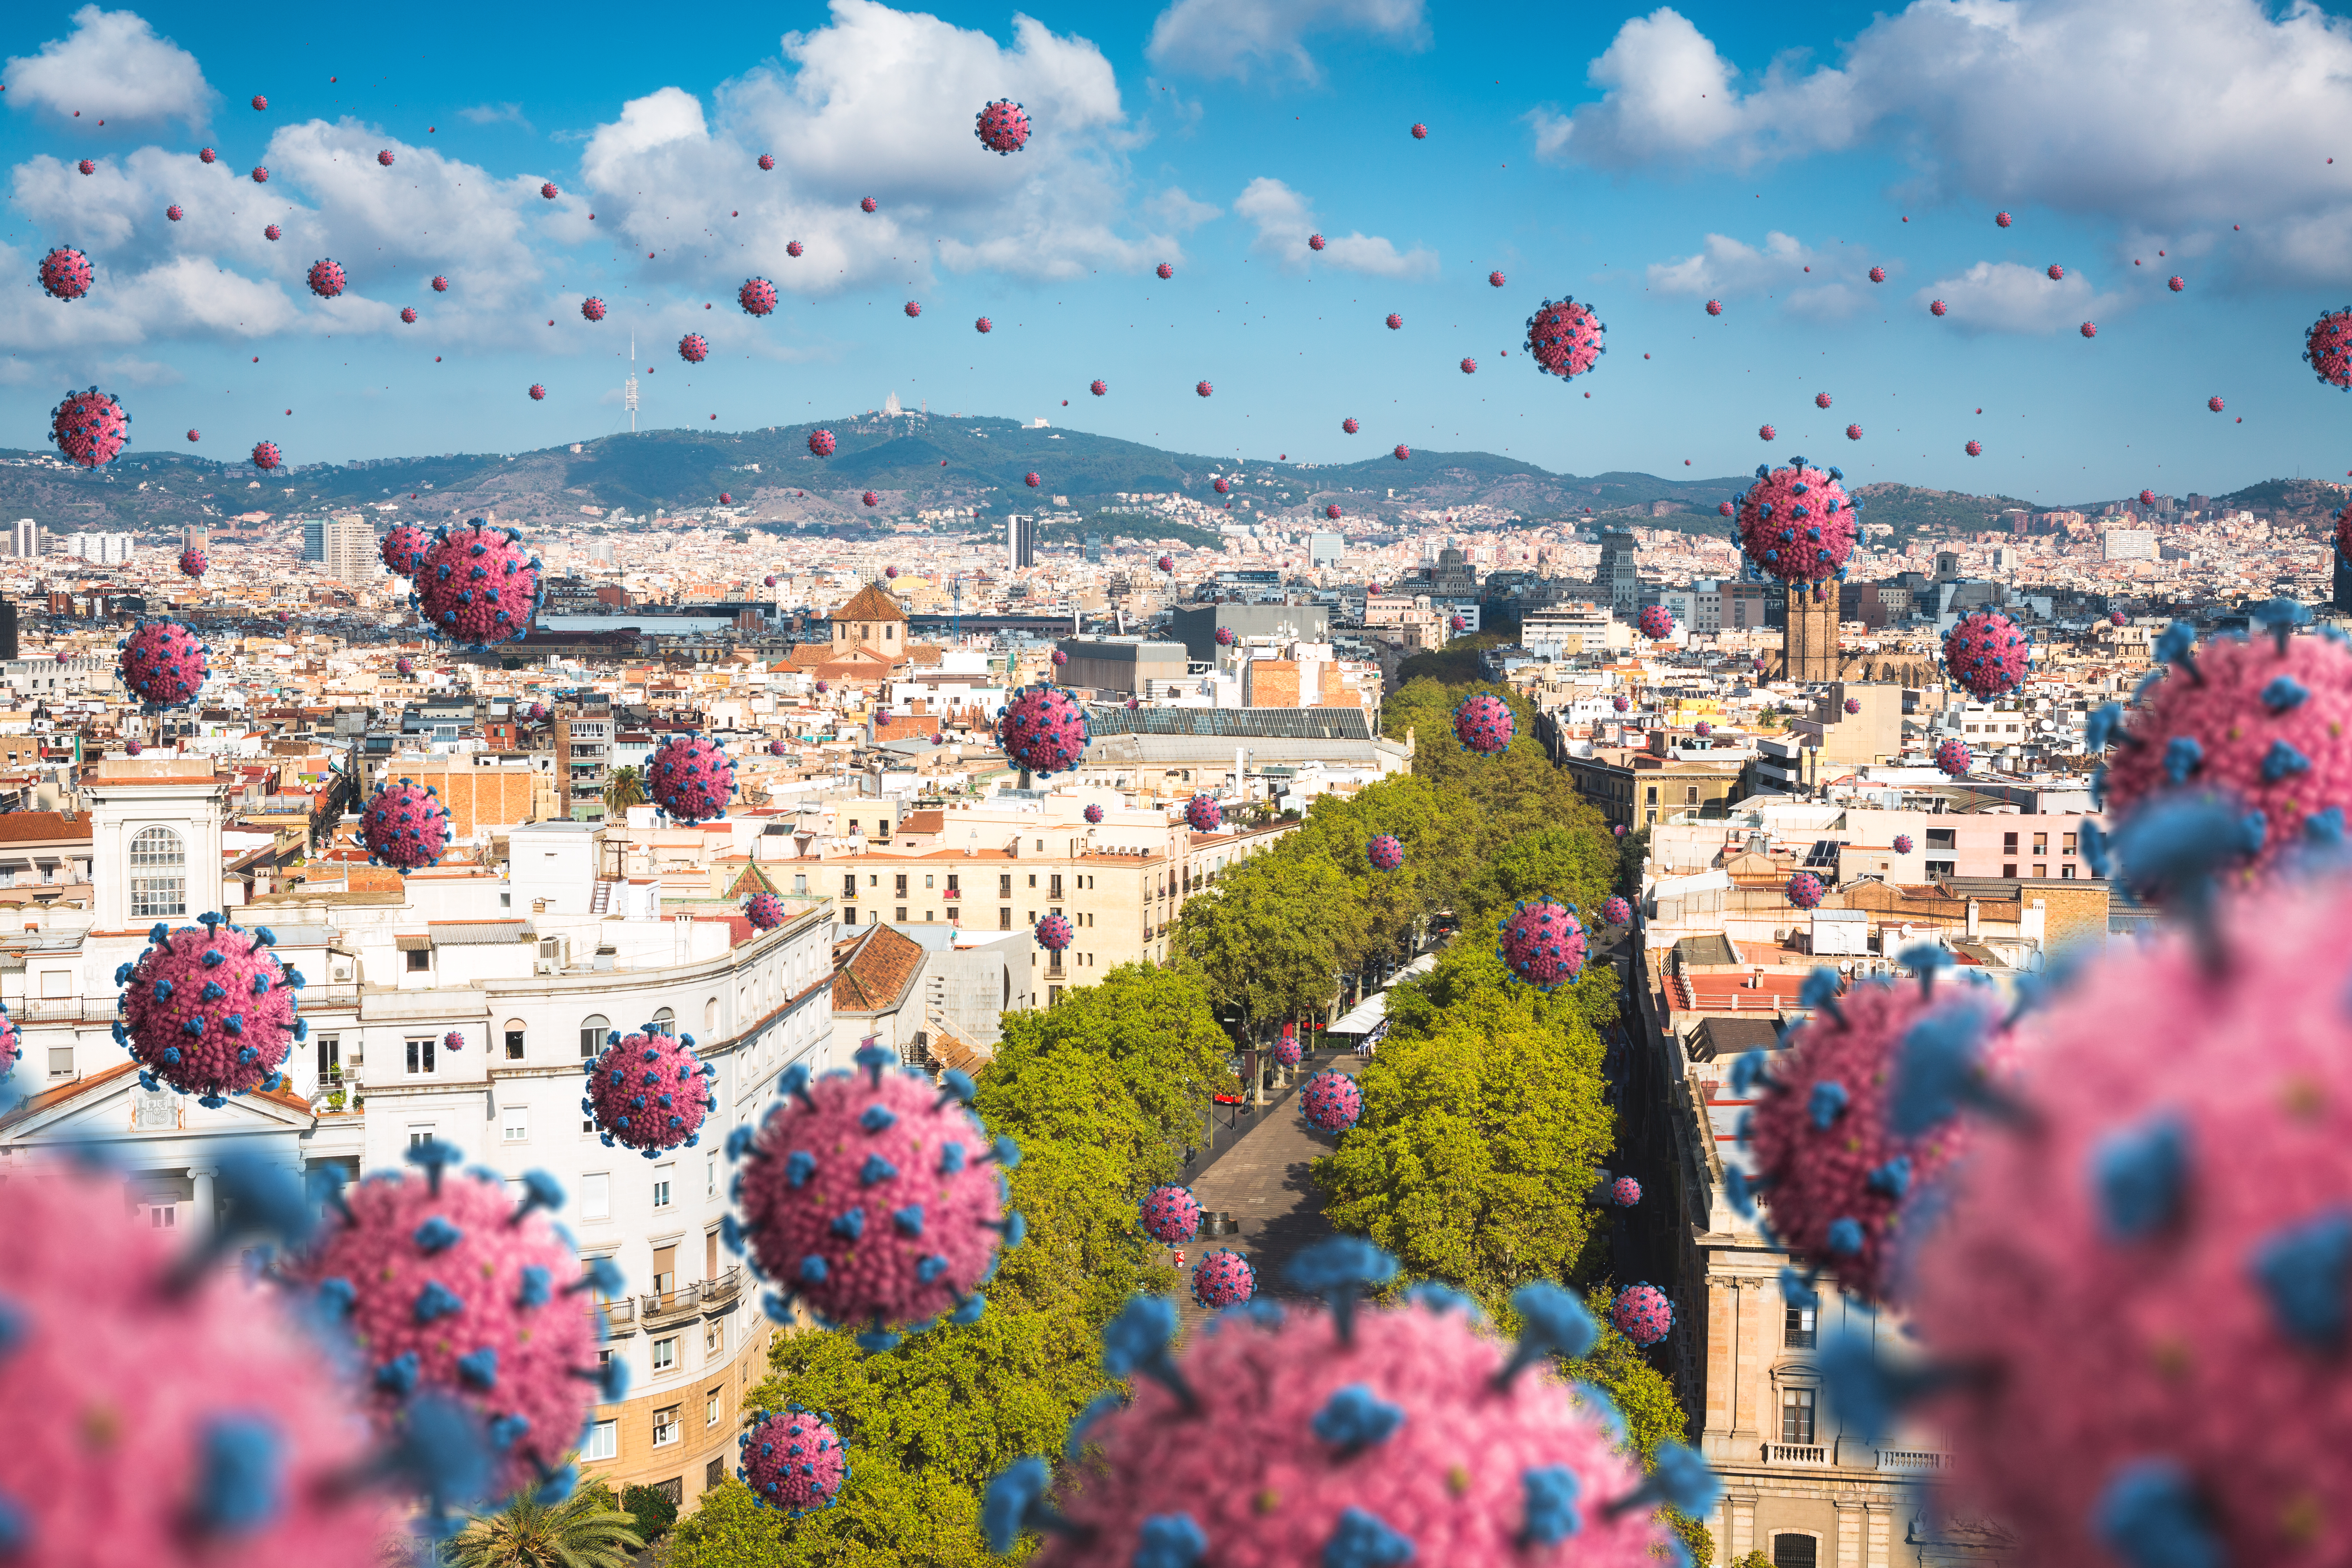 Rendering of virus spreading in the city, floating in the air above Europe